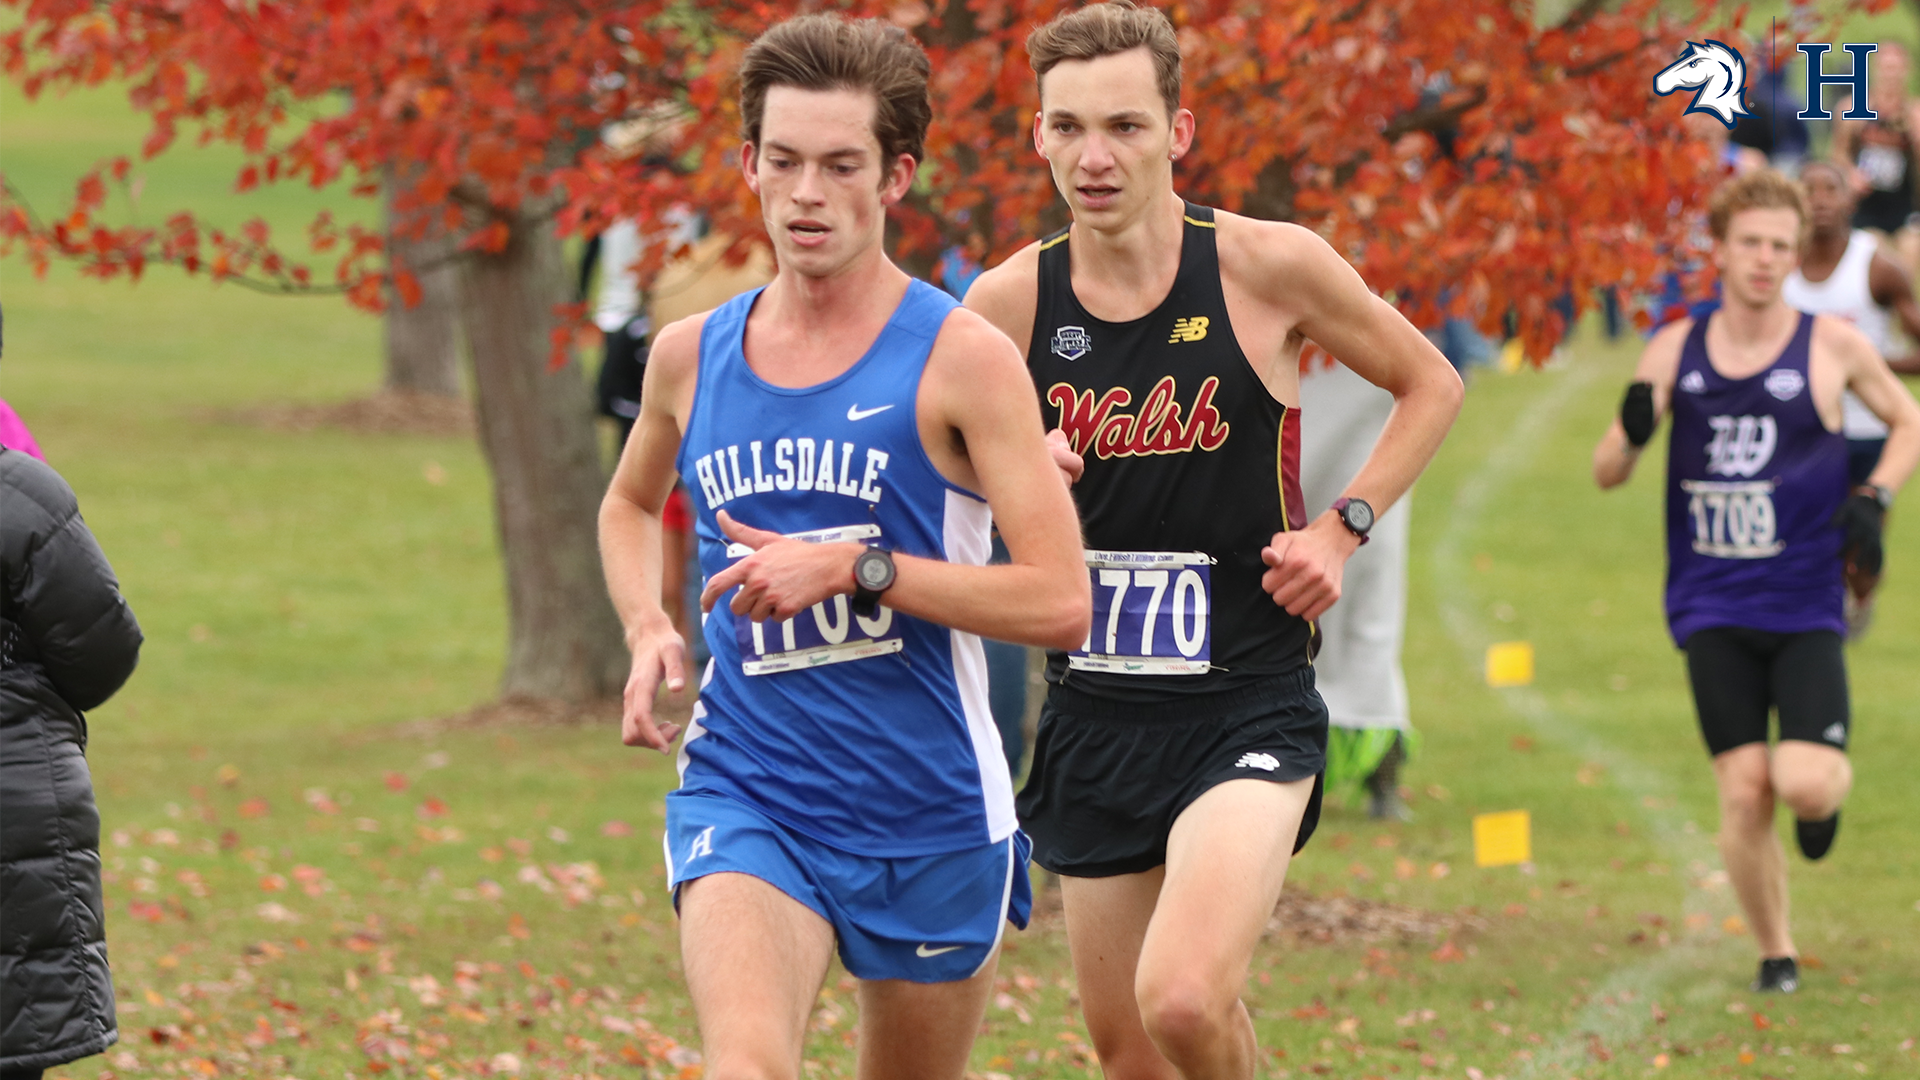 Charger men race to fourth place finish at Lucian Rosa Invite